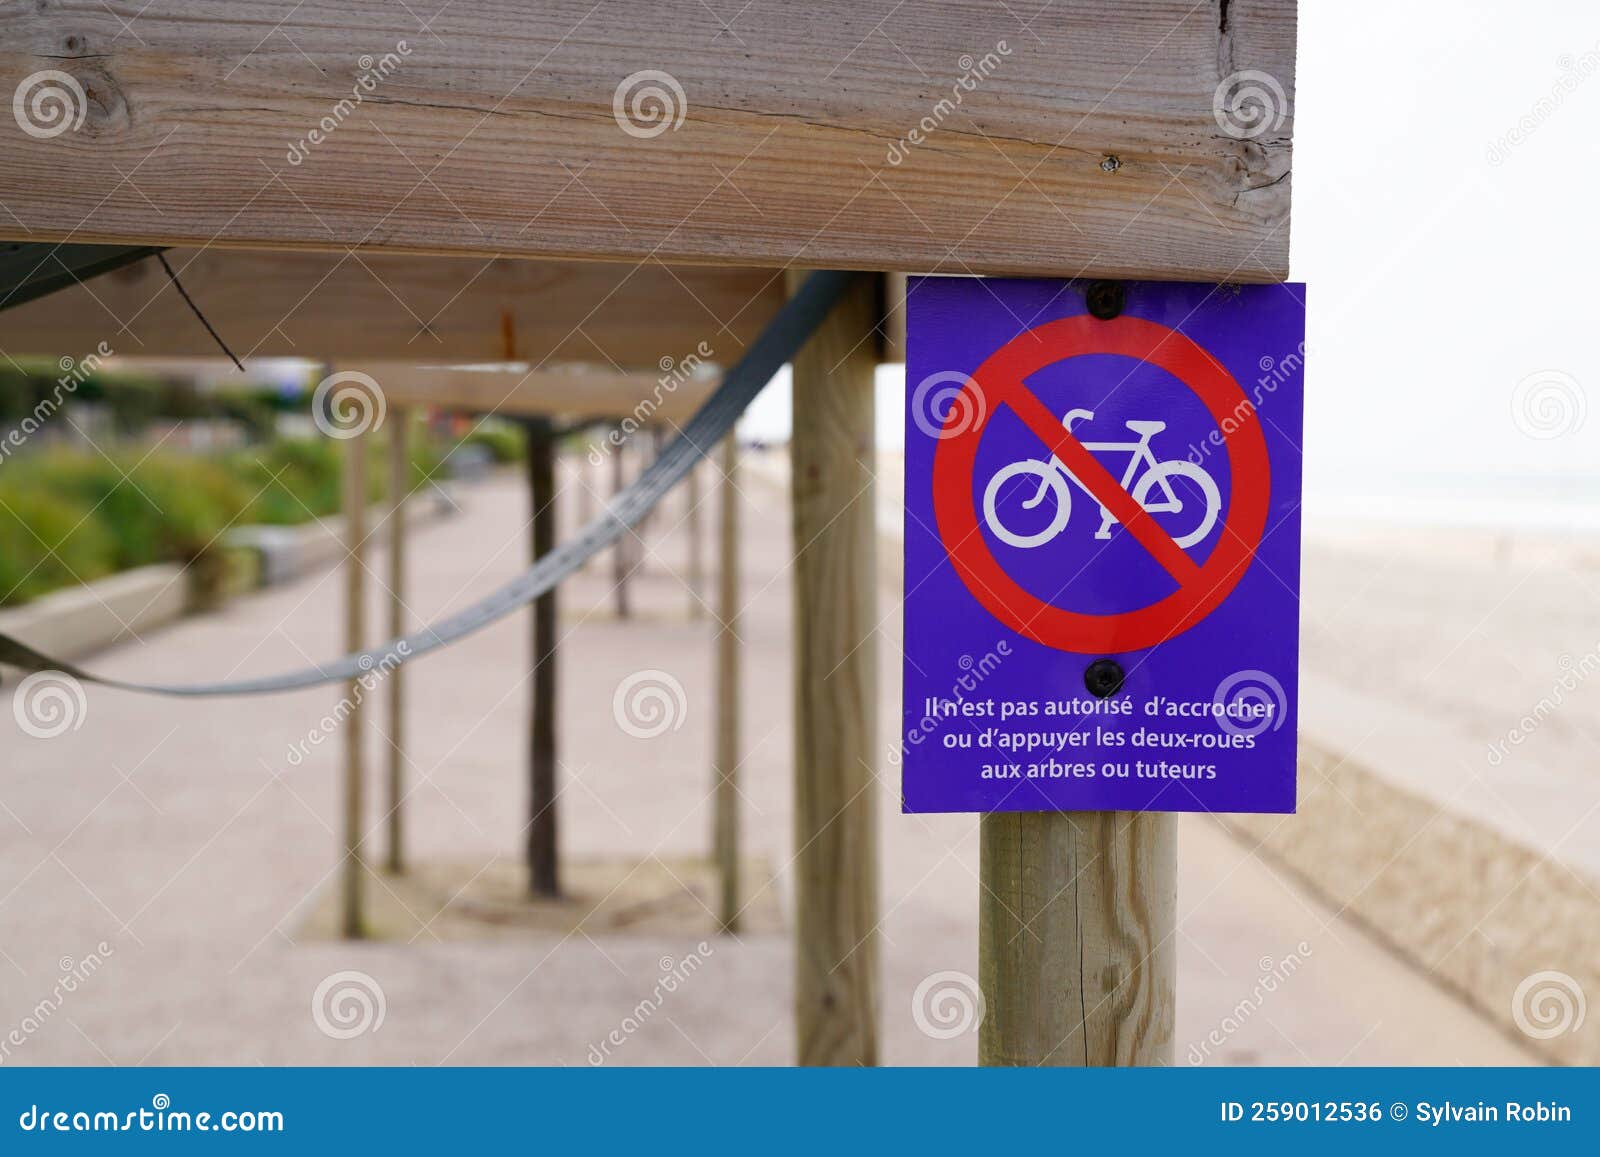 bicycle no parking bike means in french ne pas accrocher velos aux tuteurs et arbres text and sign do not park bicycle in trees